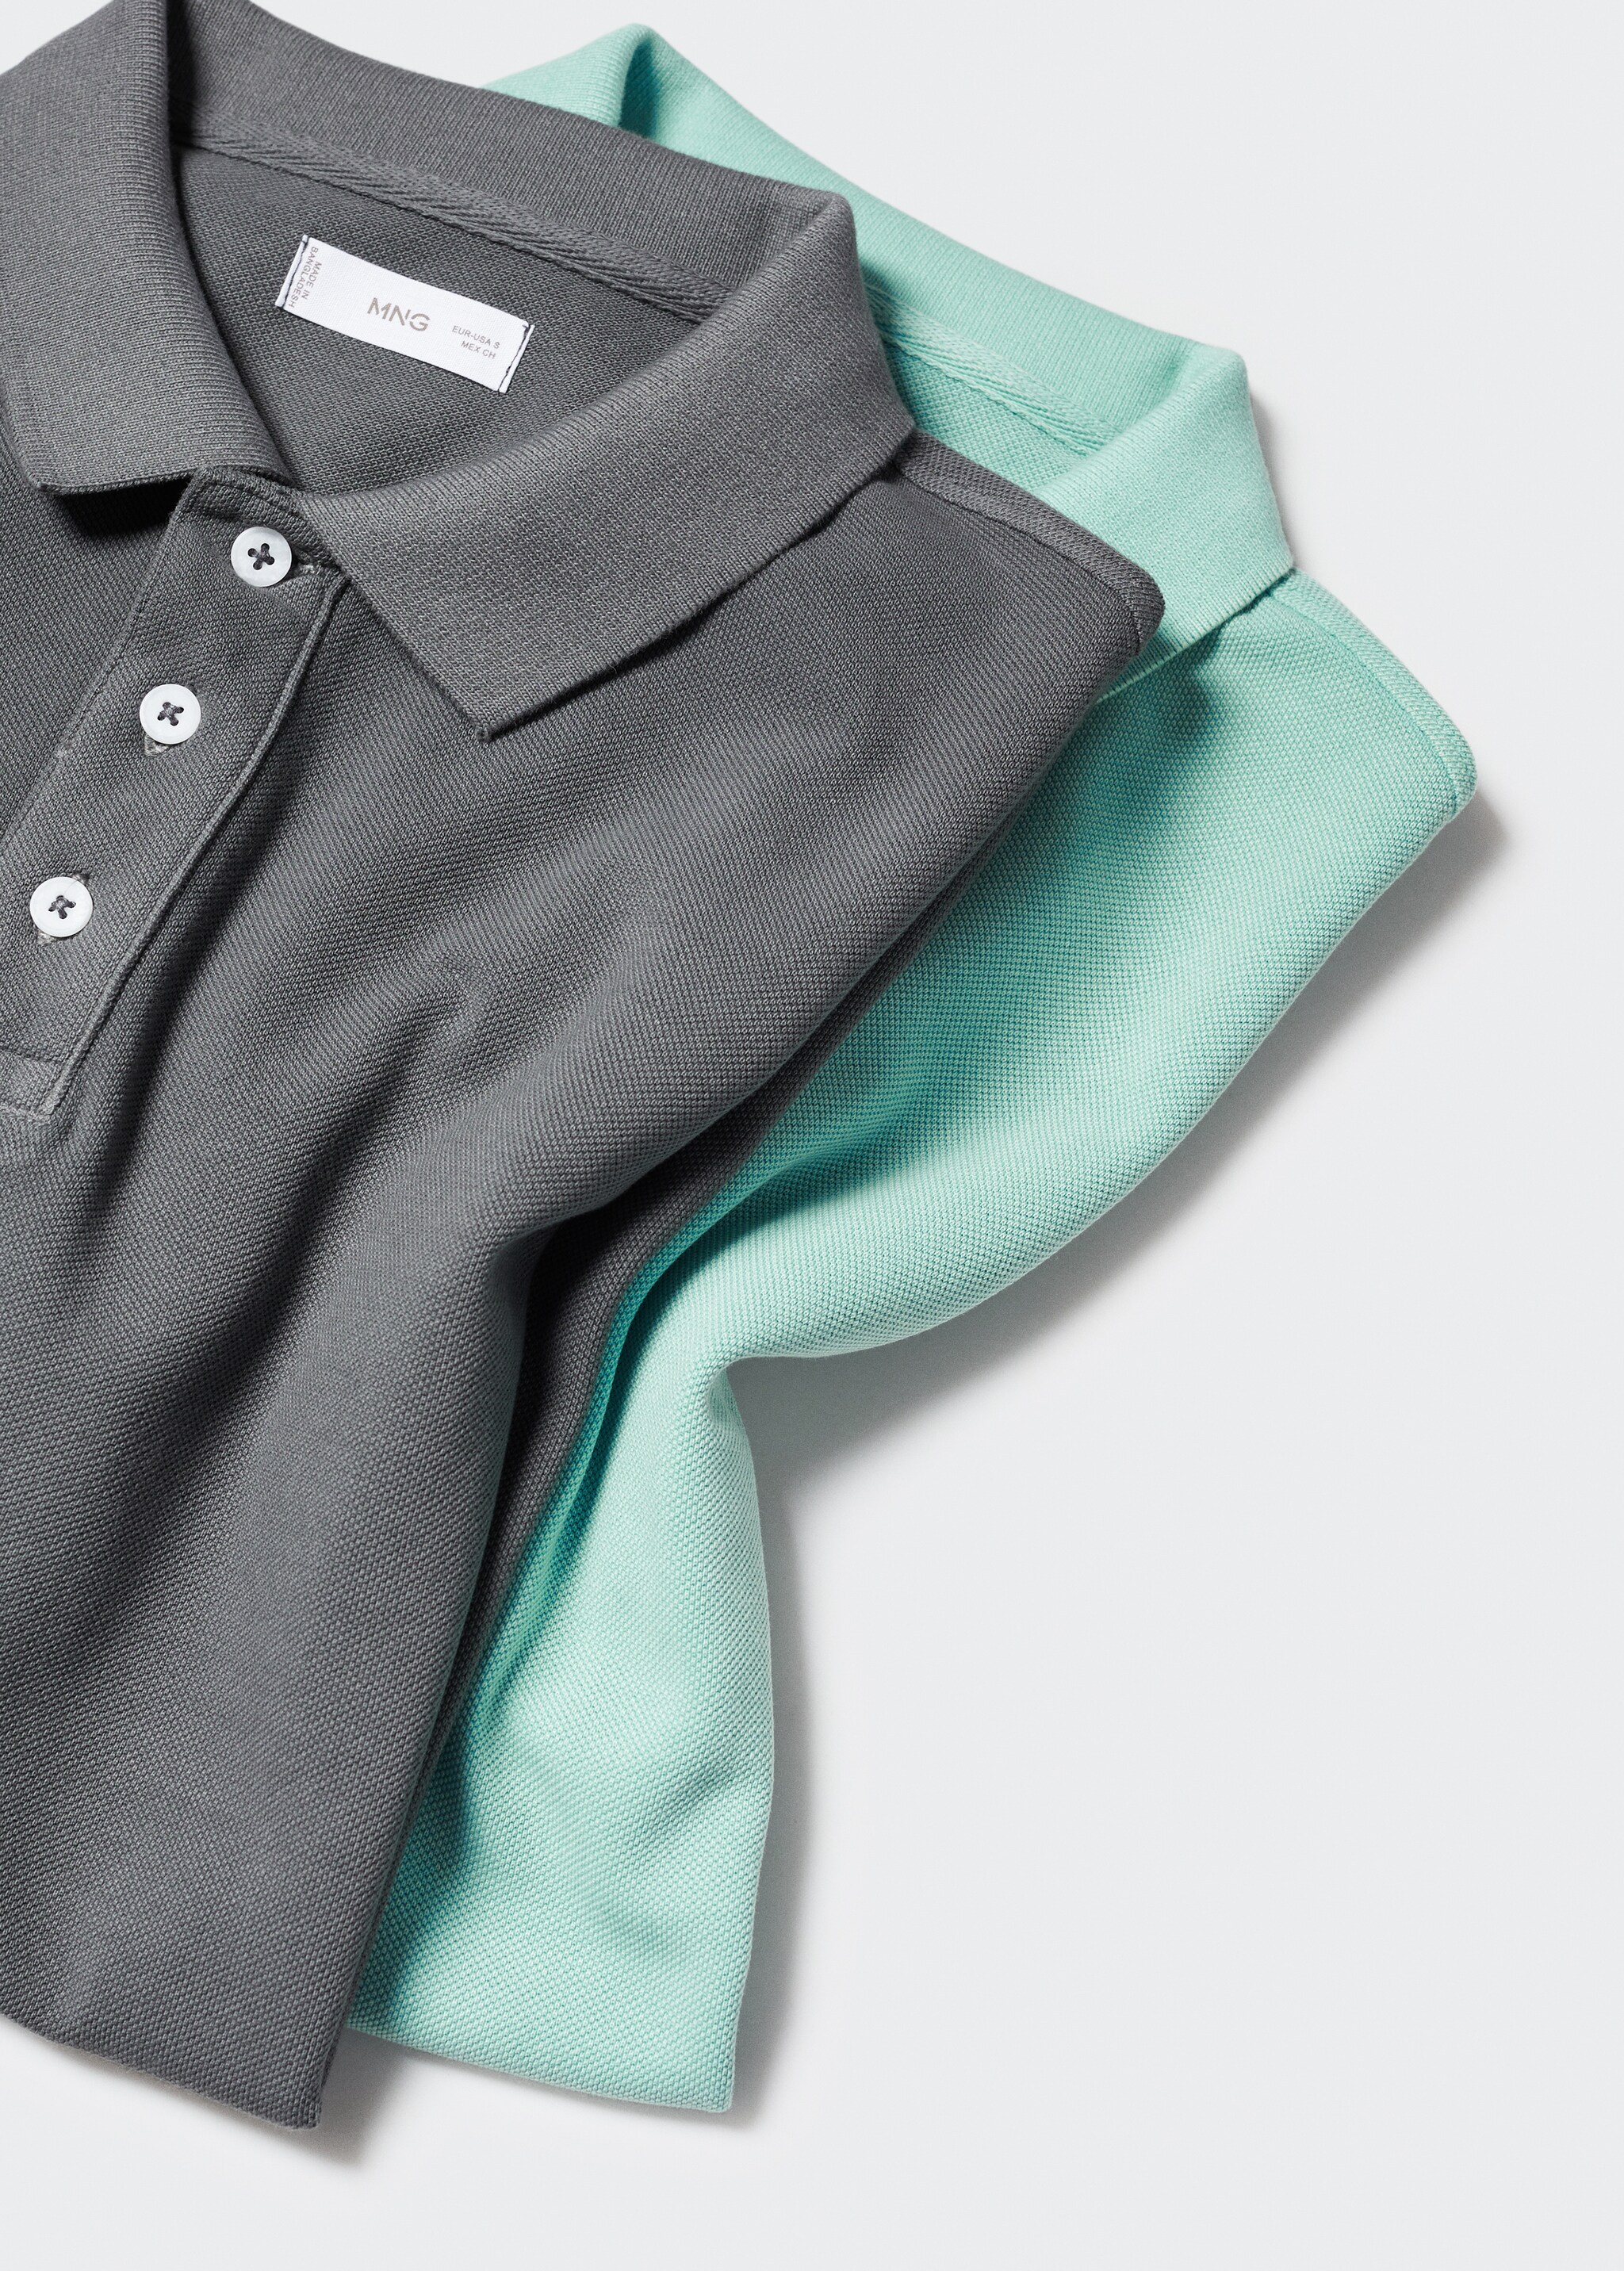 100% cotton polo shirt - Details of the article 8